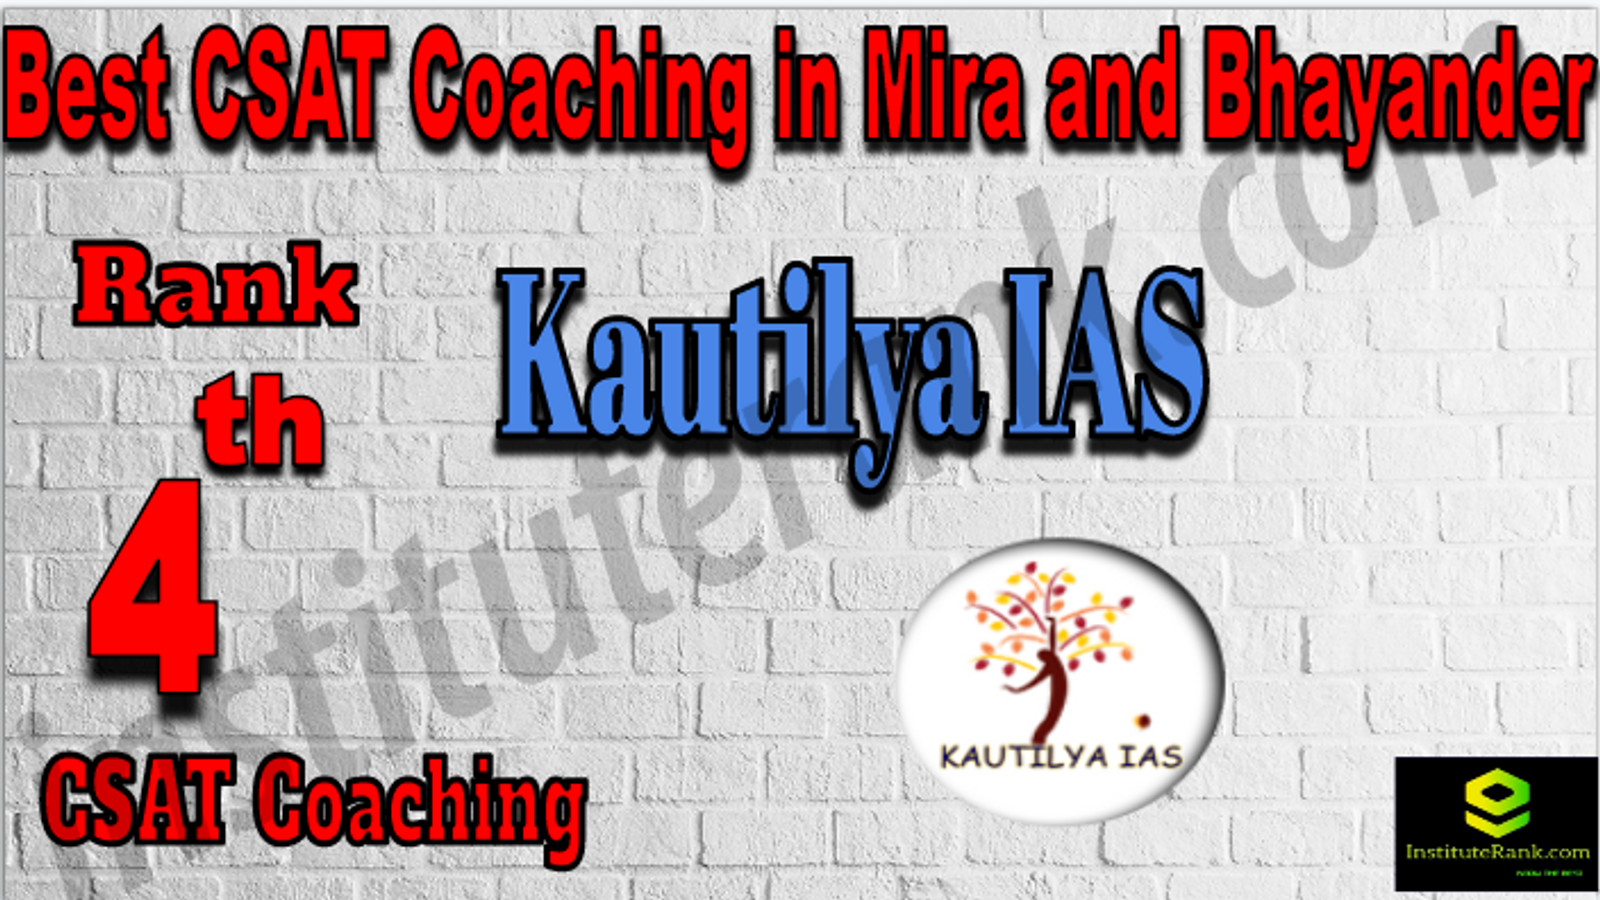 4TH CSAT Coaching in Mira and Bhayander